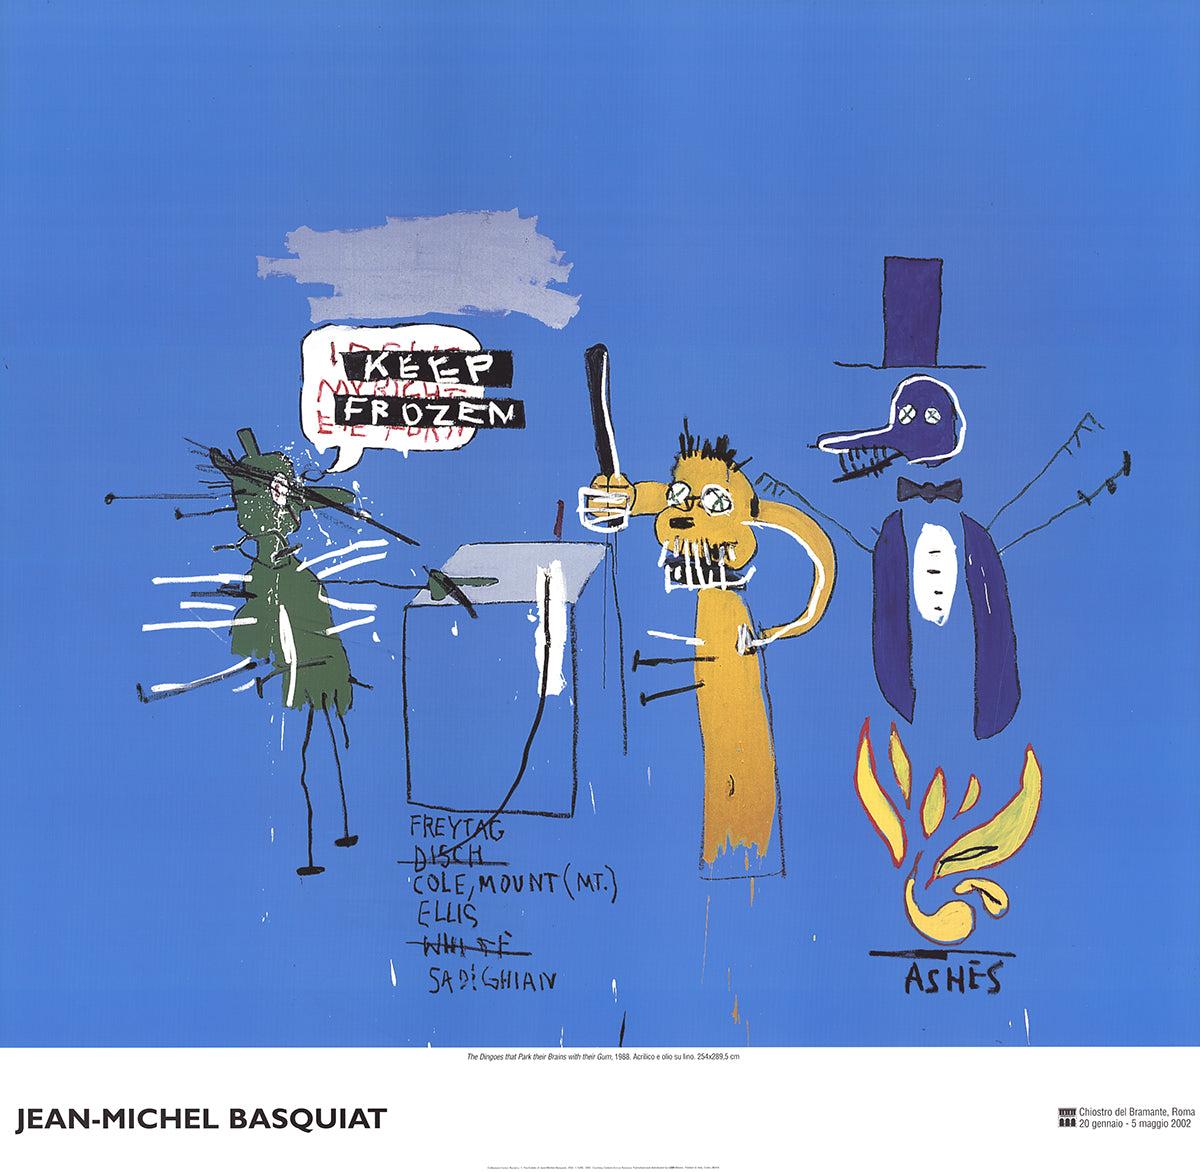 AFTER JEAN-MICHEL BASQUIAT The Dingoes that Park Their Brain with Their Gum  - Print by Jean-Michel Basquiat